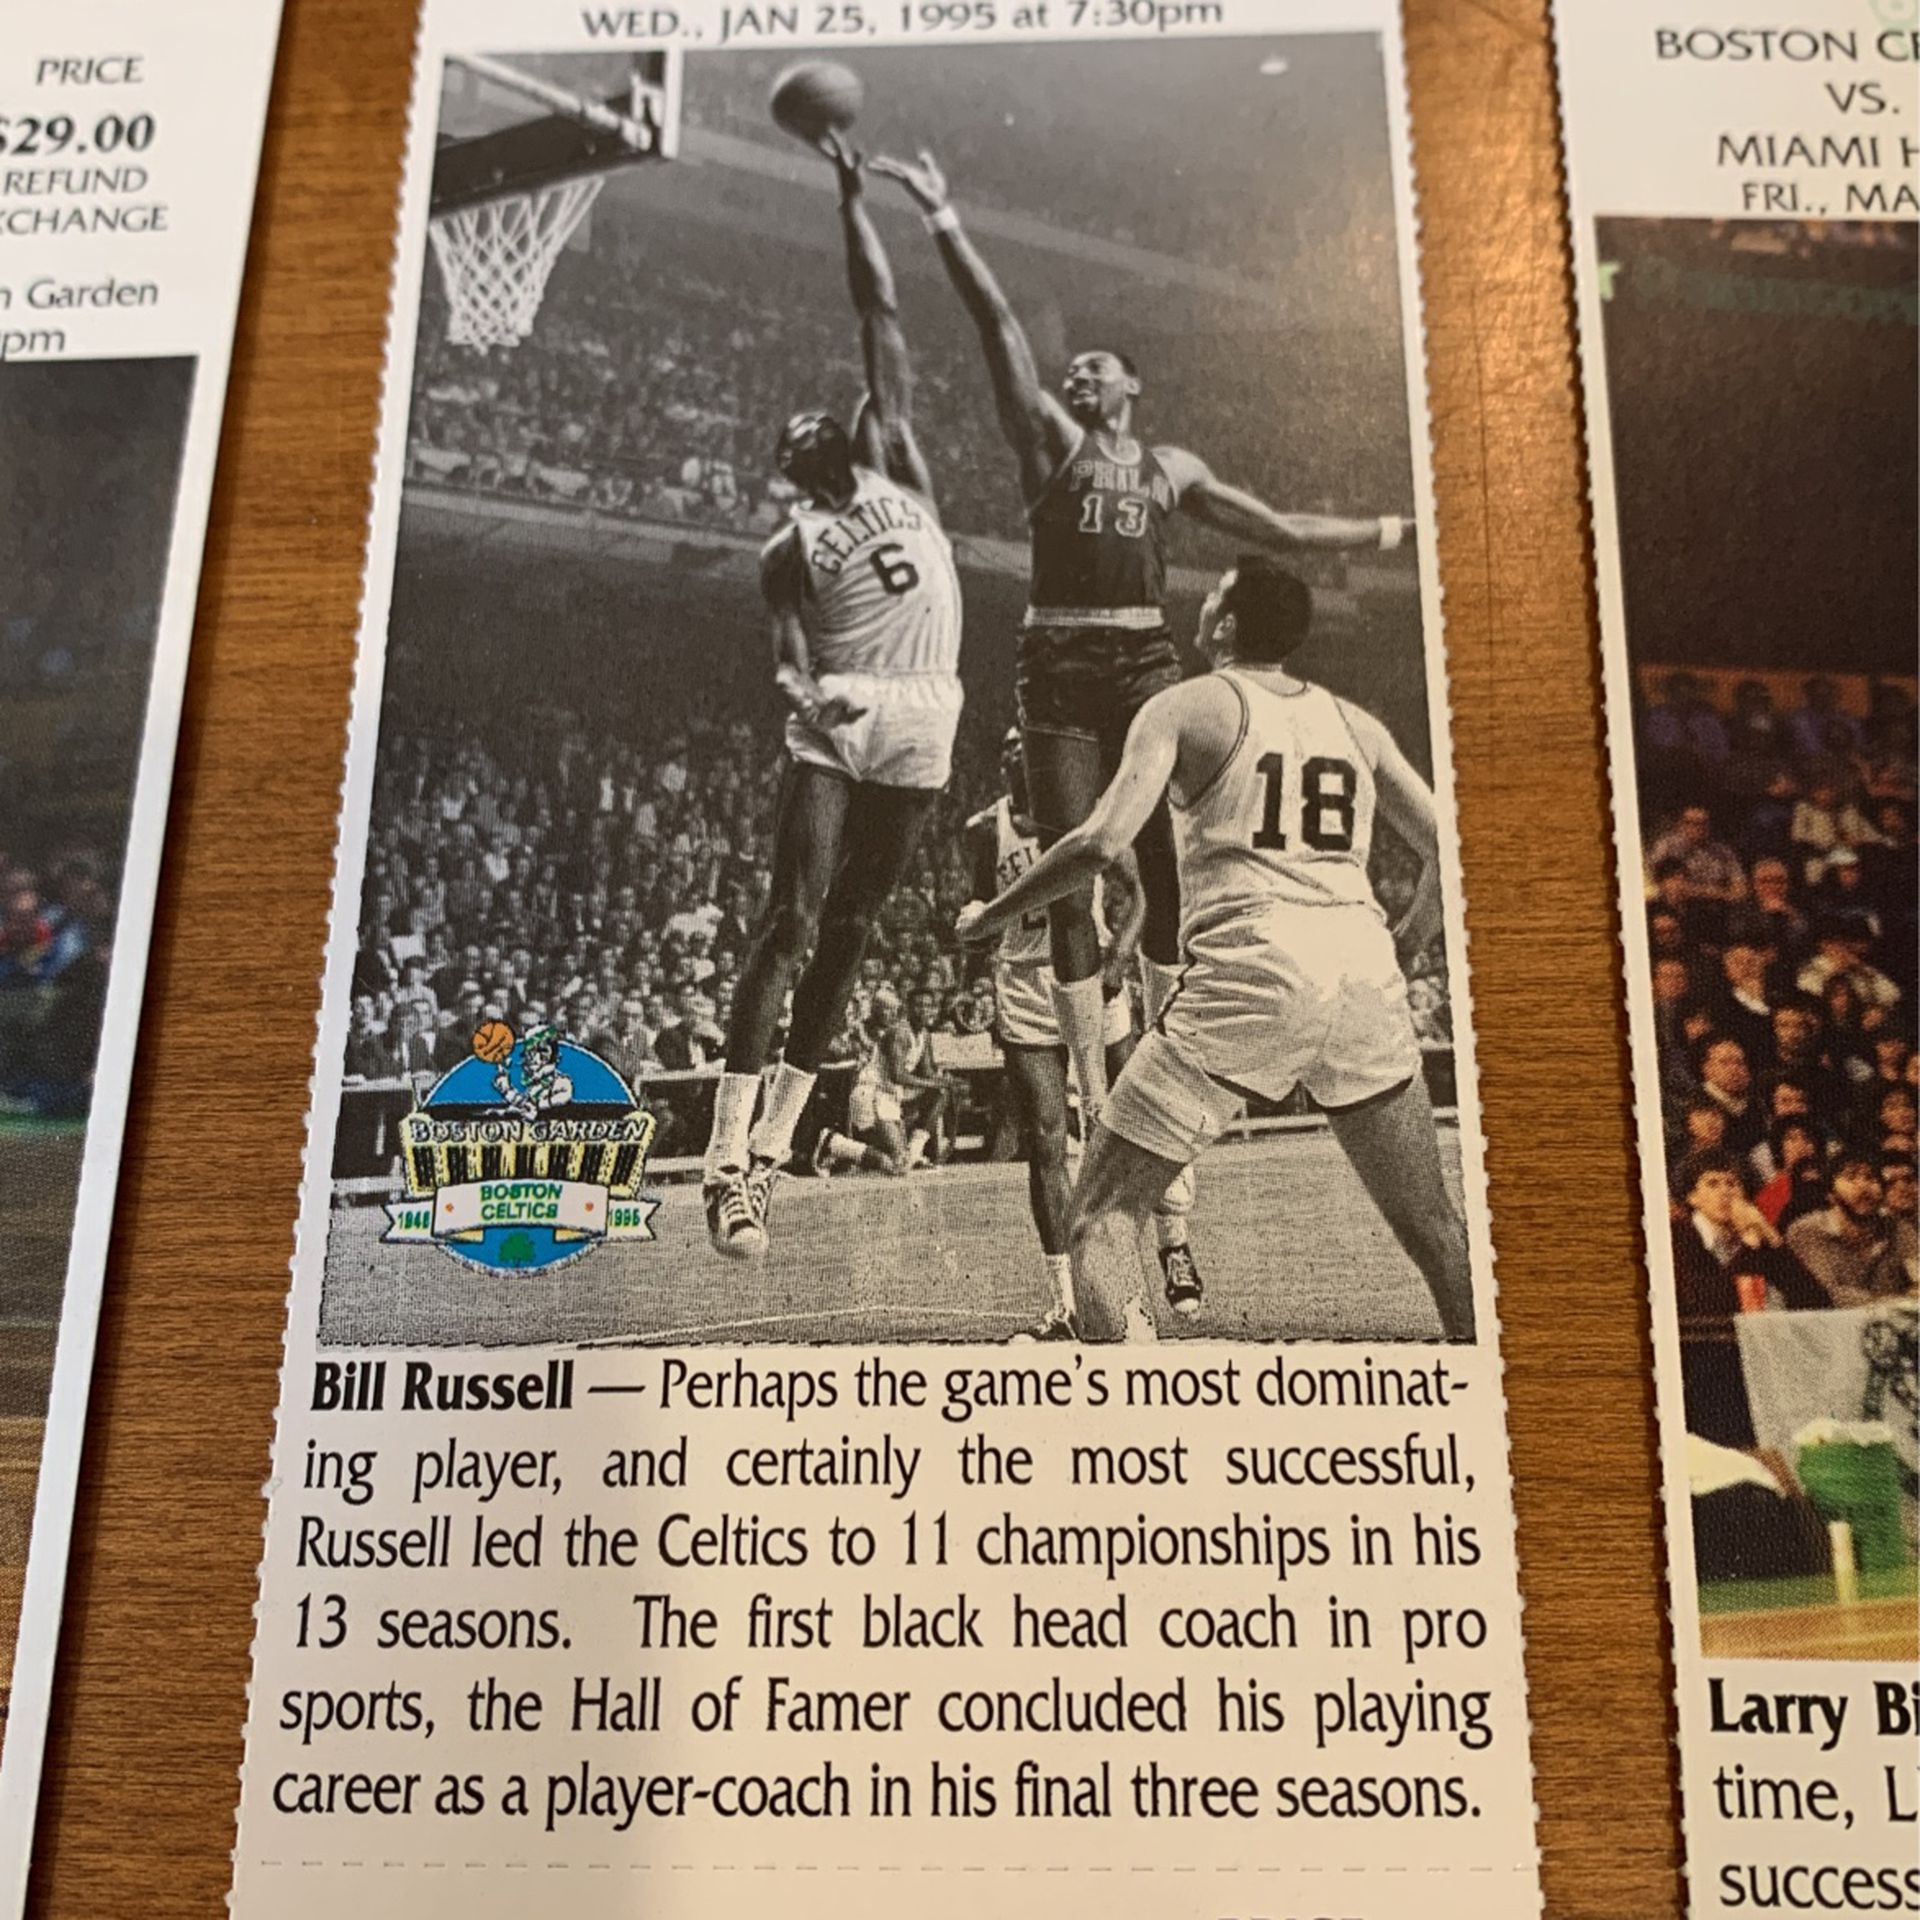 4 Iconic  Celtics Picture Game Tickets From Last Season Of Boston Garden Of: See Description of Tickets Below